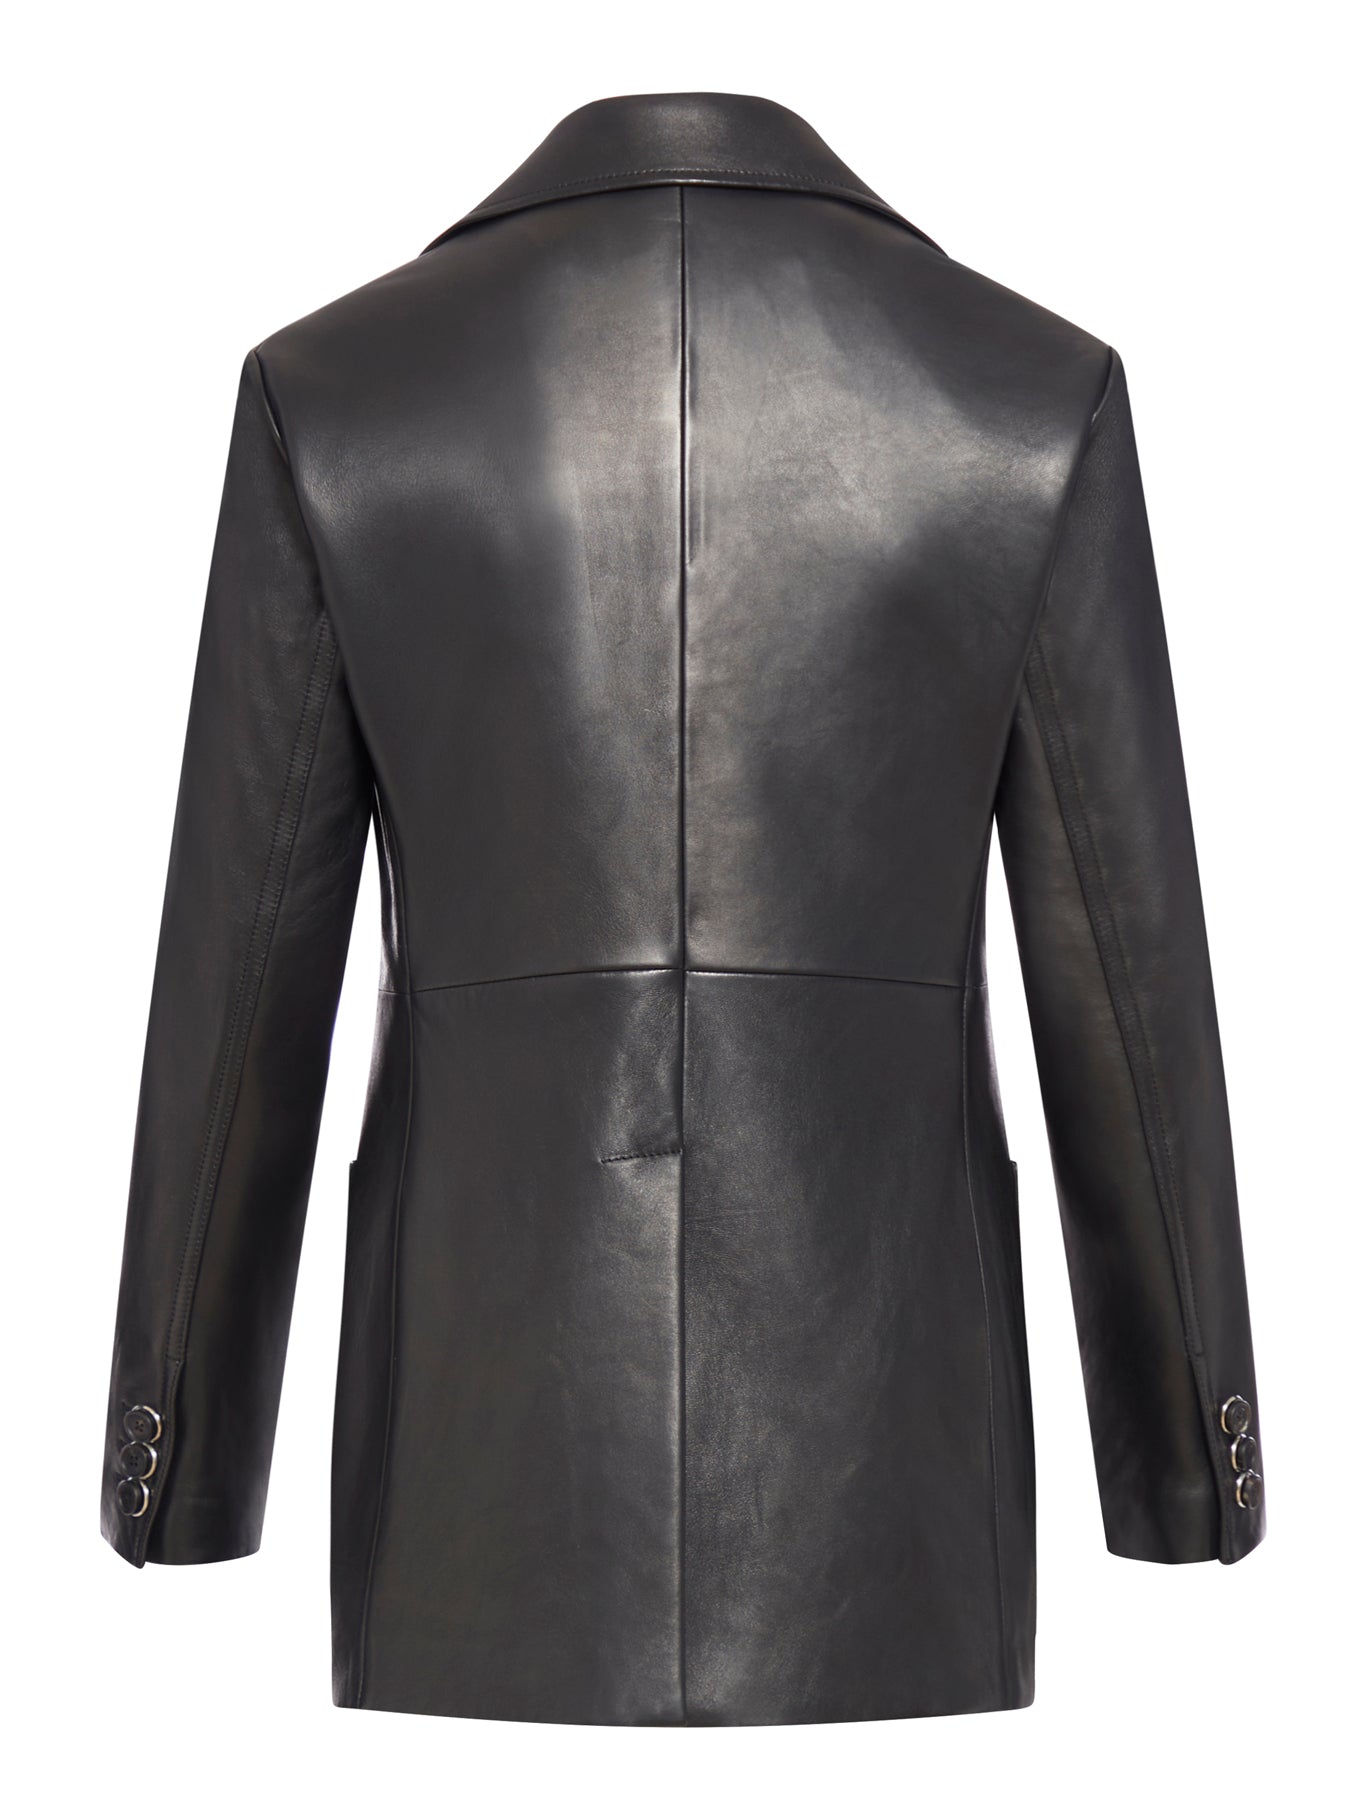 LEATHER SINGLE-BREASTED TAILORED jACKET